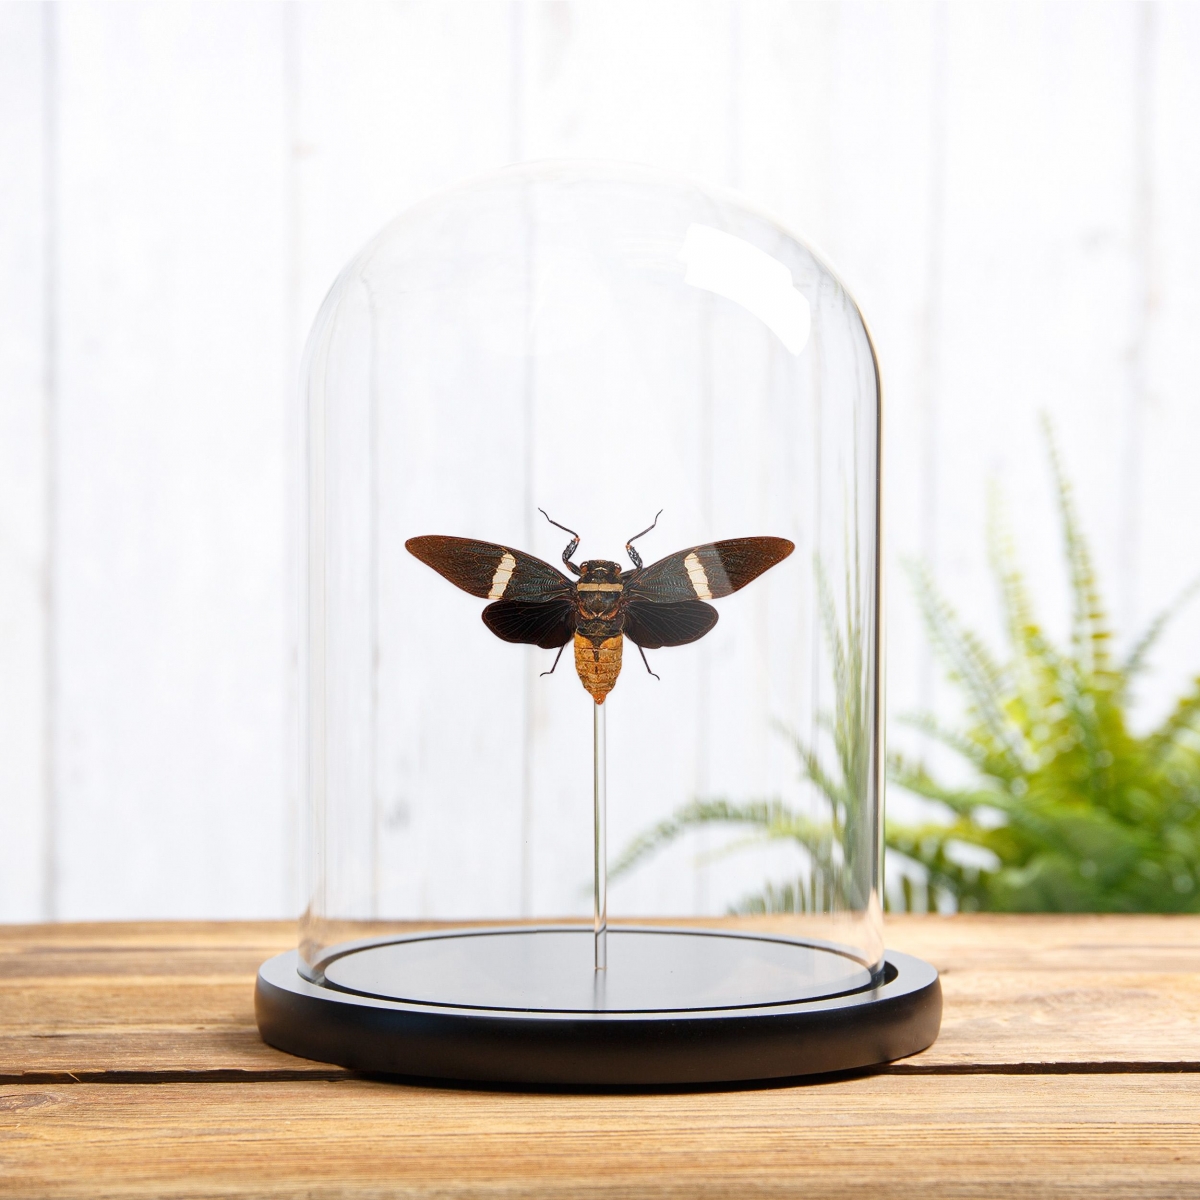 Minibeast Cicada in Glass Dome with Wooden Base (Tosena albata)